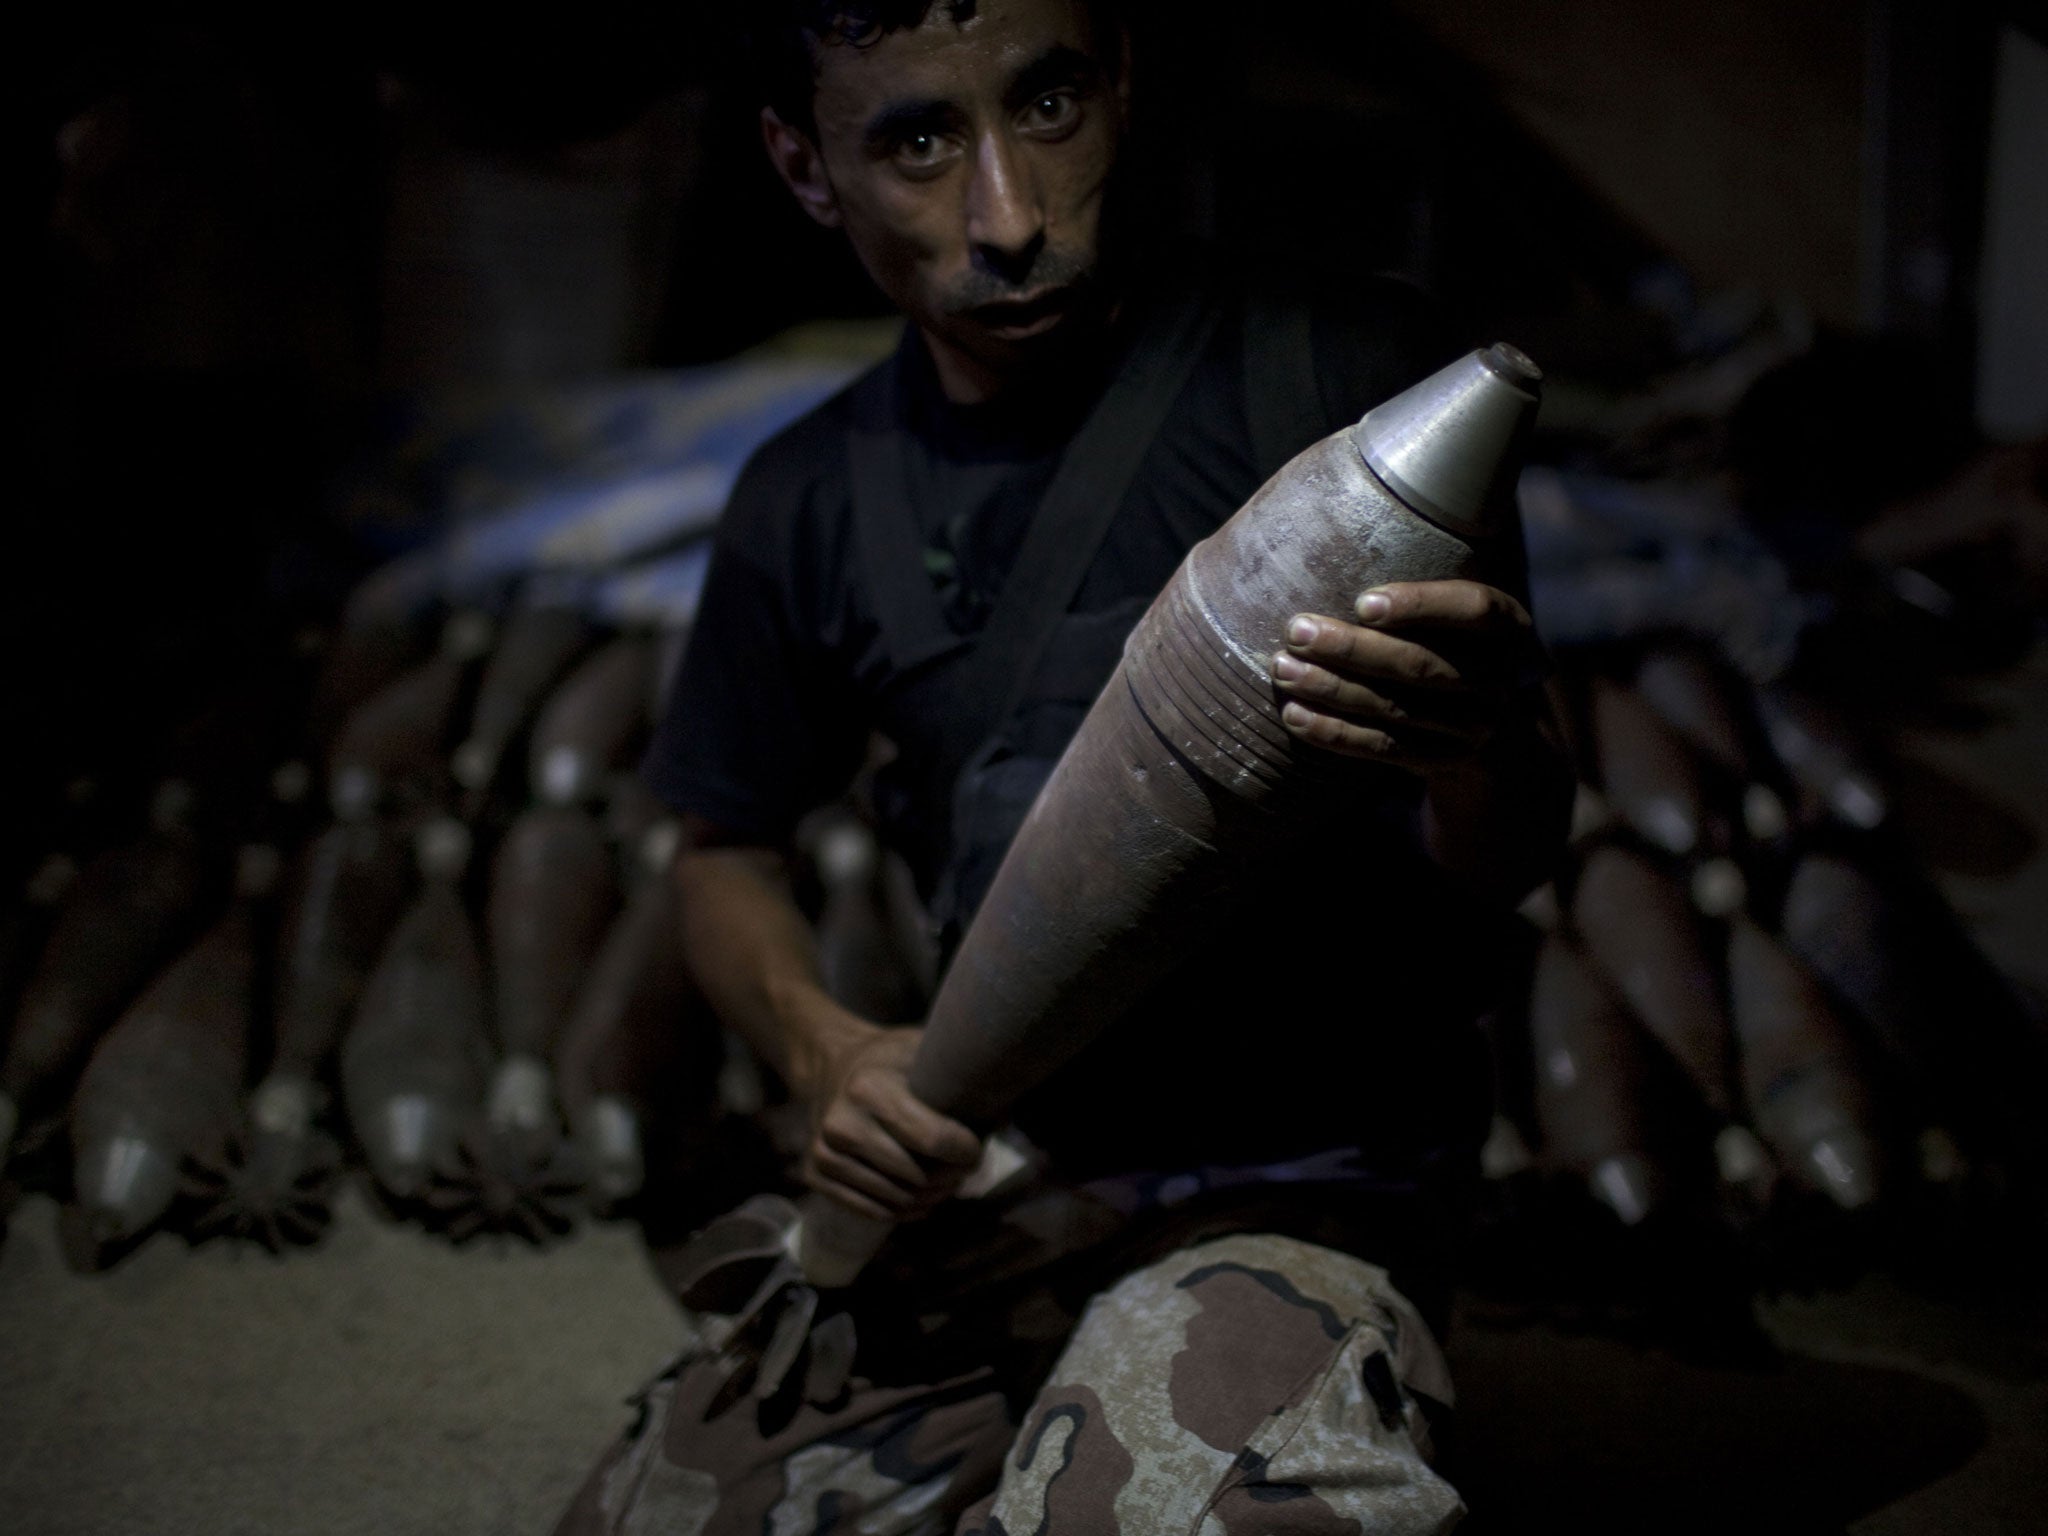 A rebel fighter holds an improvised mortar shell, one of many stacked at a factory in the city of Aleppo, Syria's commercial capital, on July 7, 2013. Syria's 27-month war between rebel forces and pro-government troops has killed more than 100,000 people, a monitoring group group estimates.